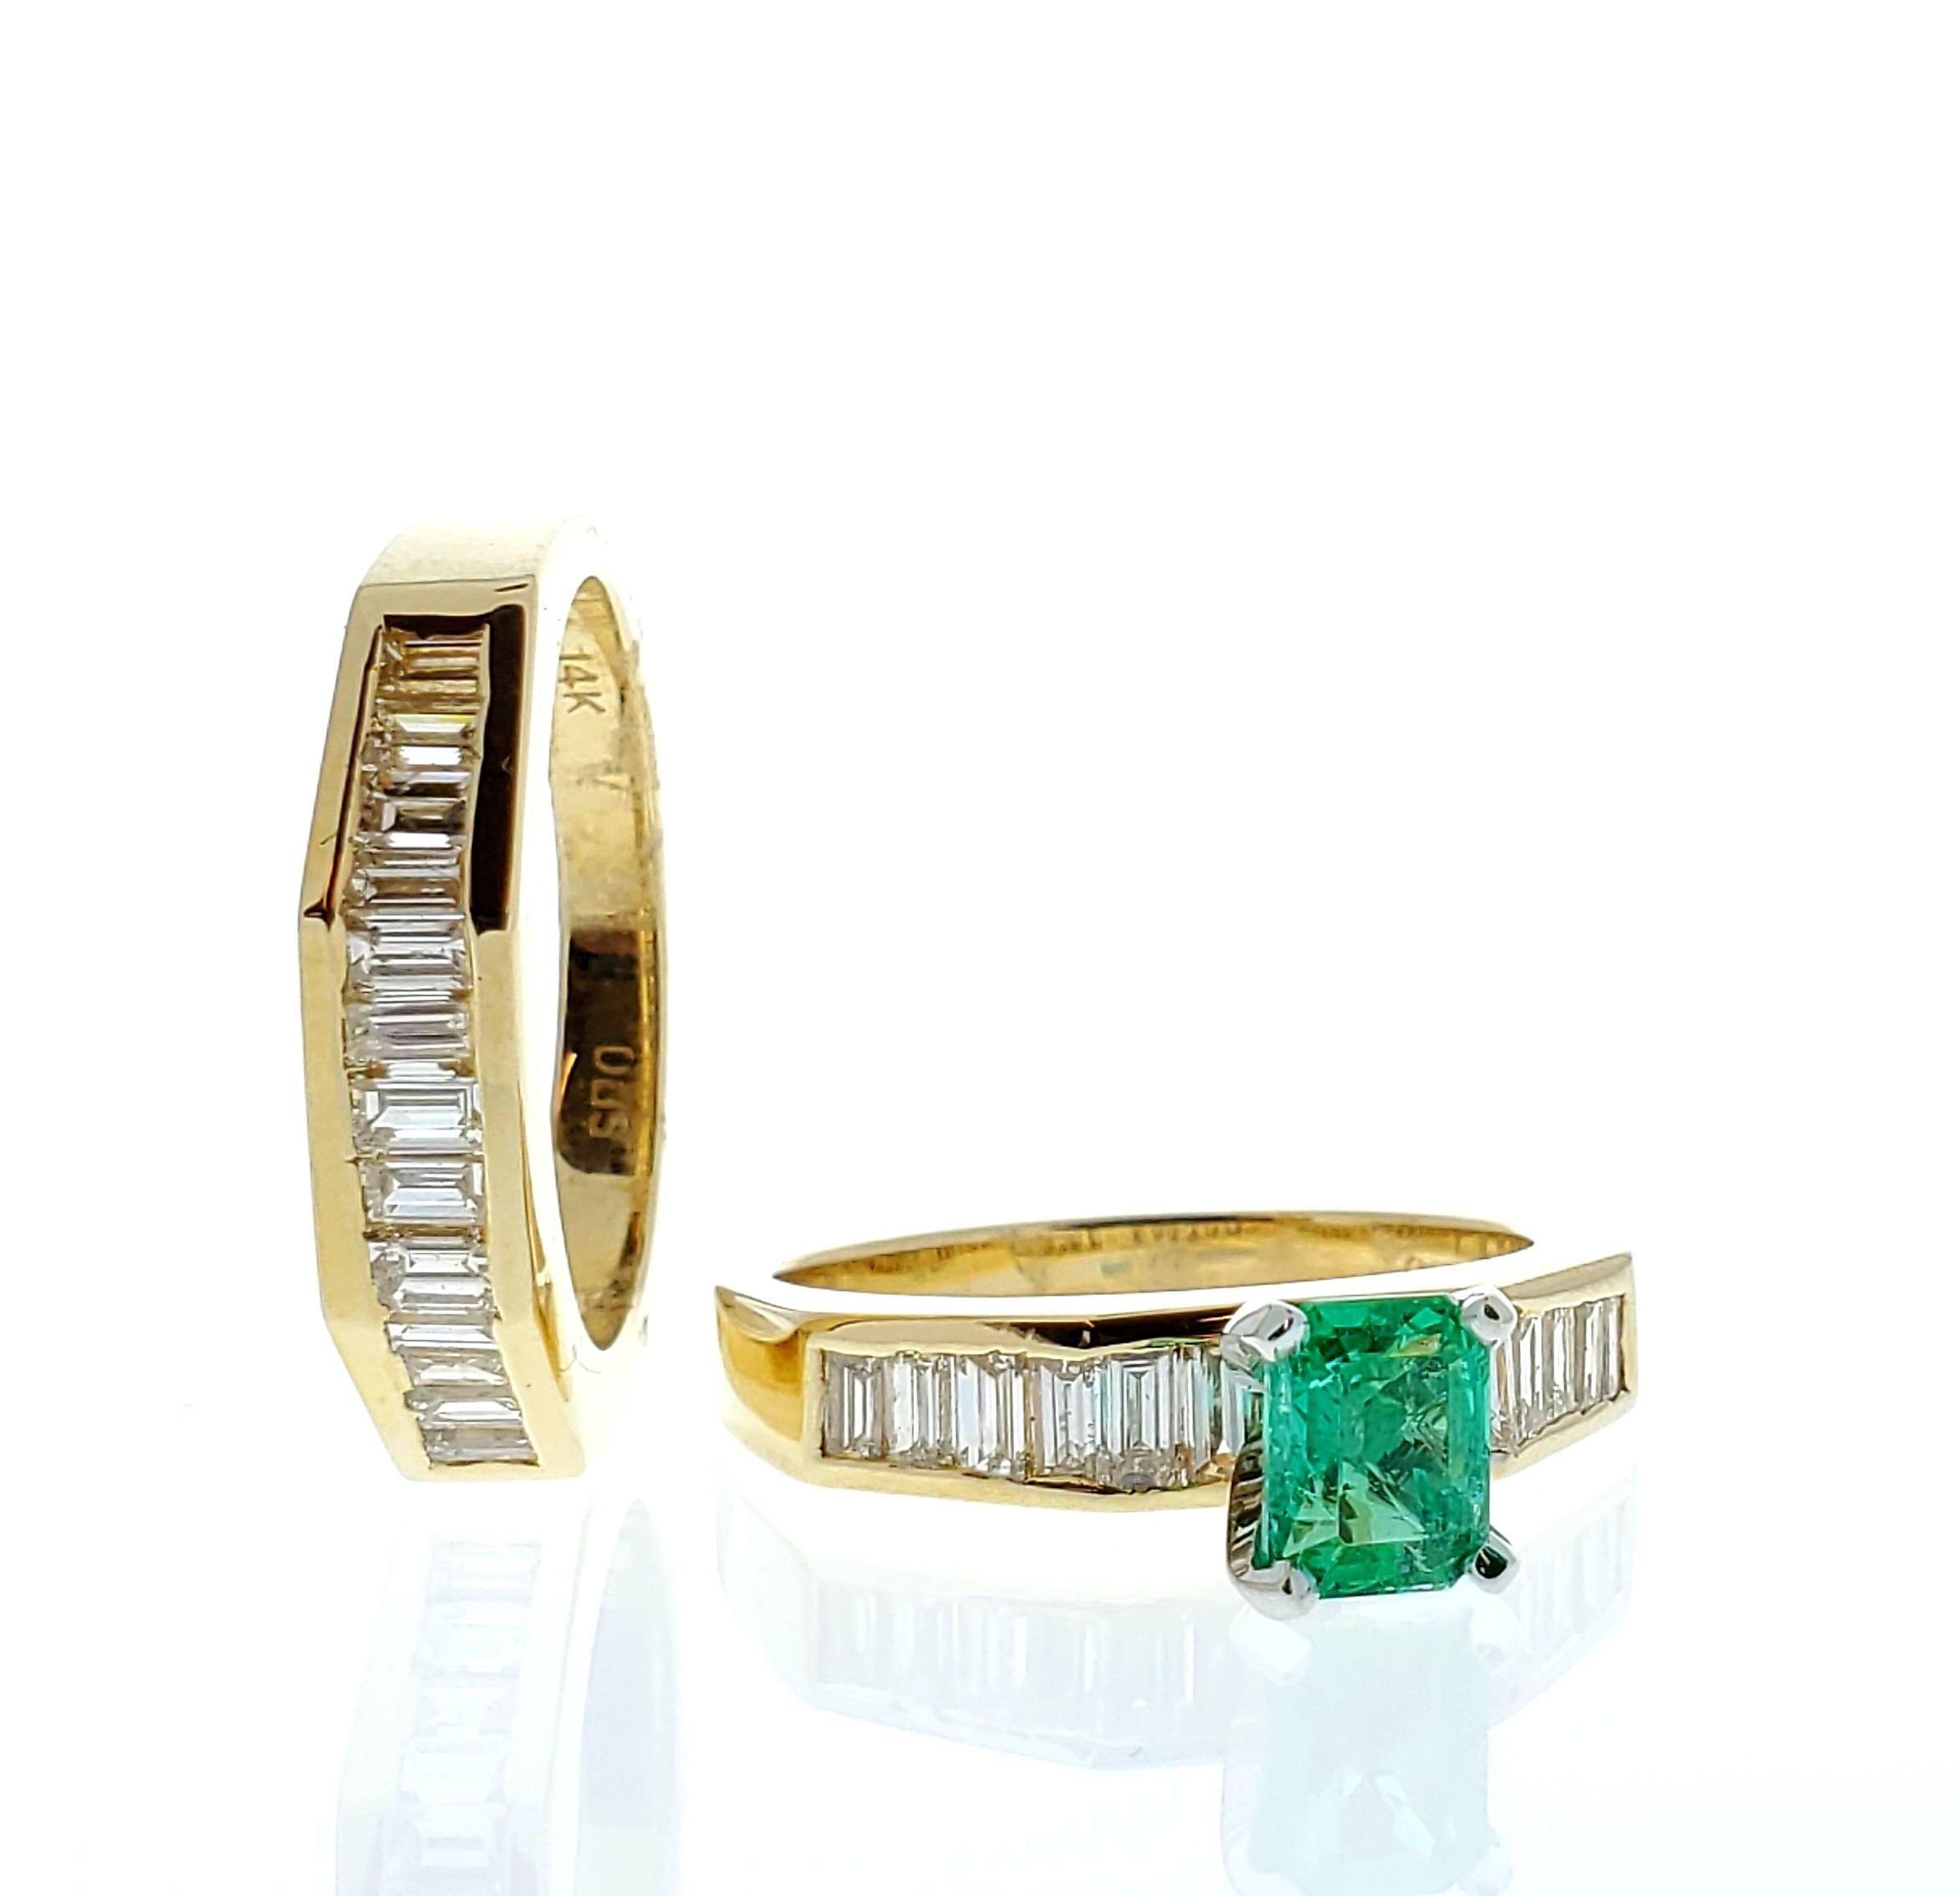 Make the most of your next momentous occasion with this spectacular Colombian emerald and diamond ring set. Finely crafted in brightly polished 14 karat yellow gold. A hand-selected green emerald is prong set in the center with measurements of  6.06